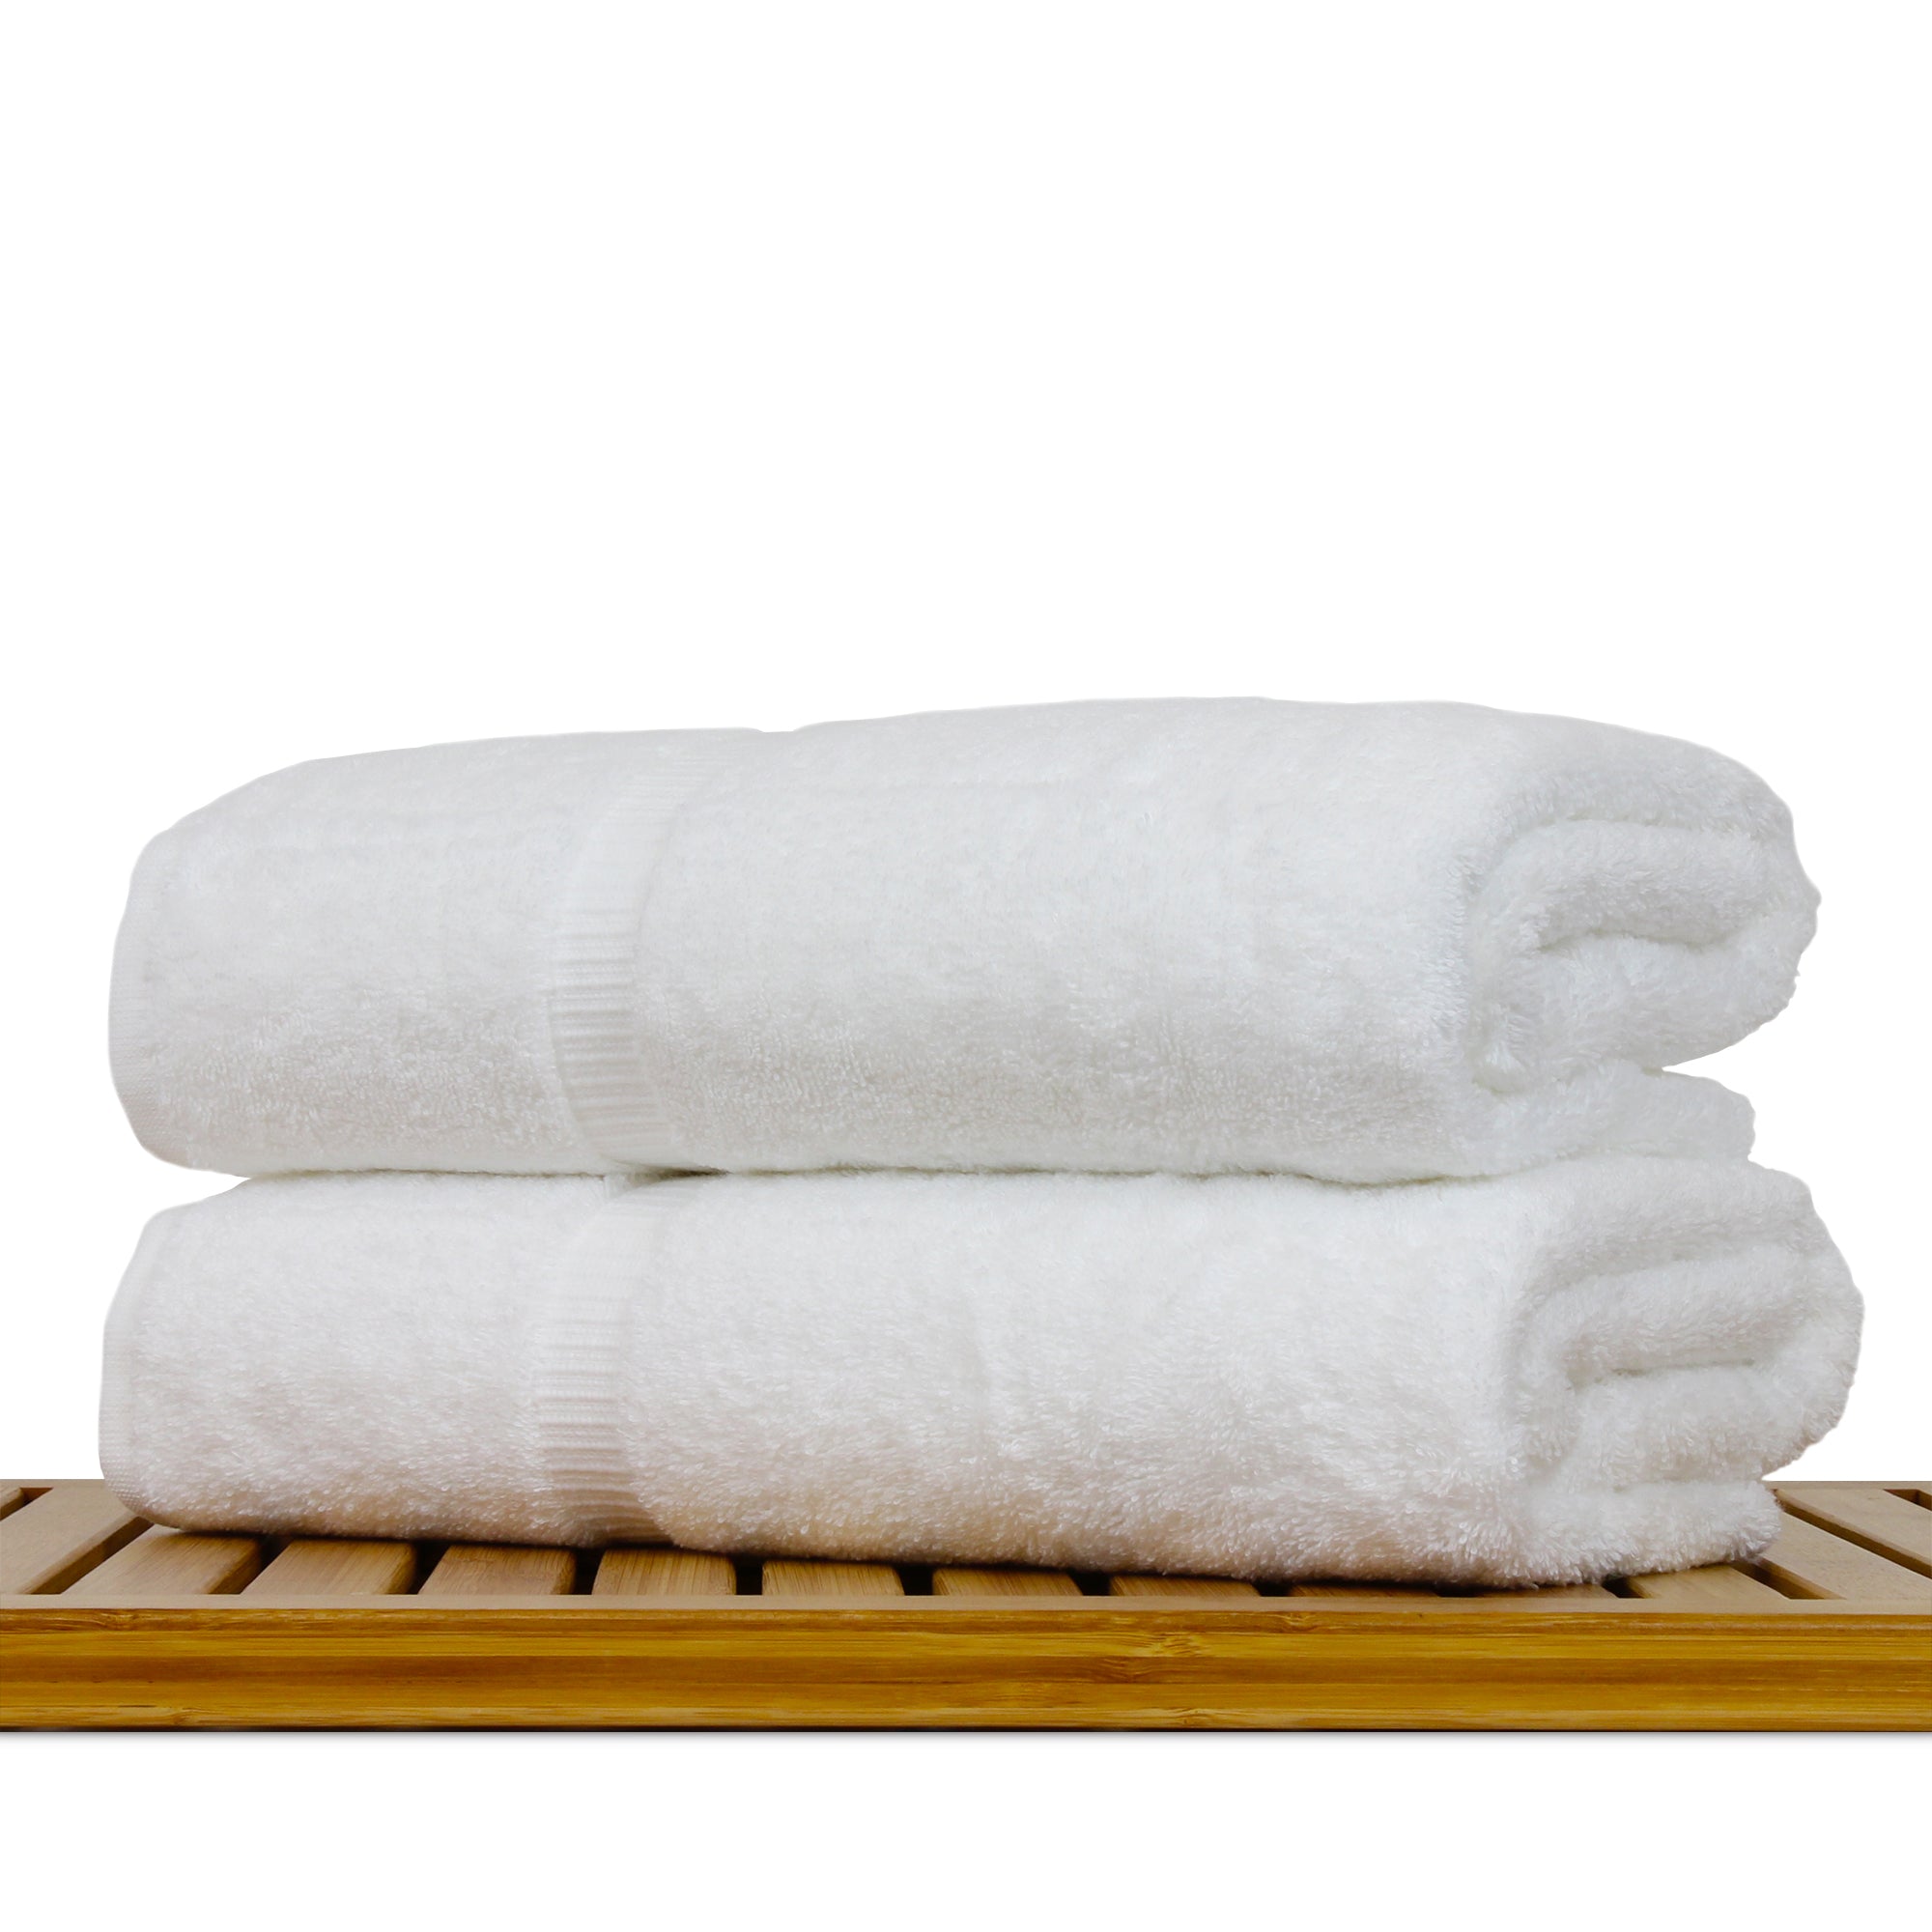 Luxury 100% Turkish Cotton Microfibre Bath Towel Set Extra Large Size For  Home, Beach, And Spa Cleaning From Gandolfi, $35.66